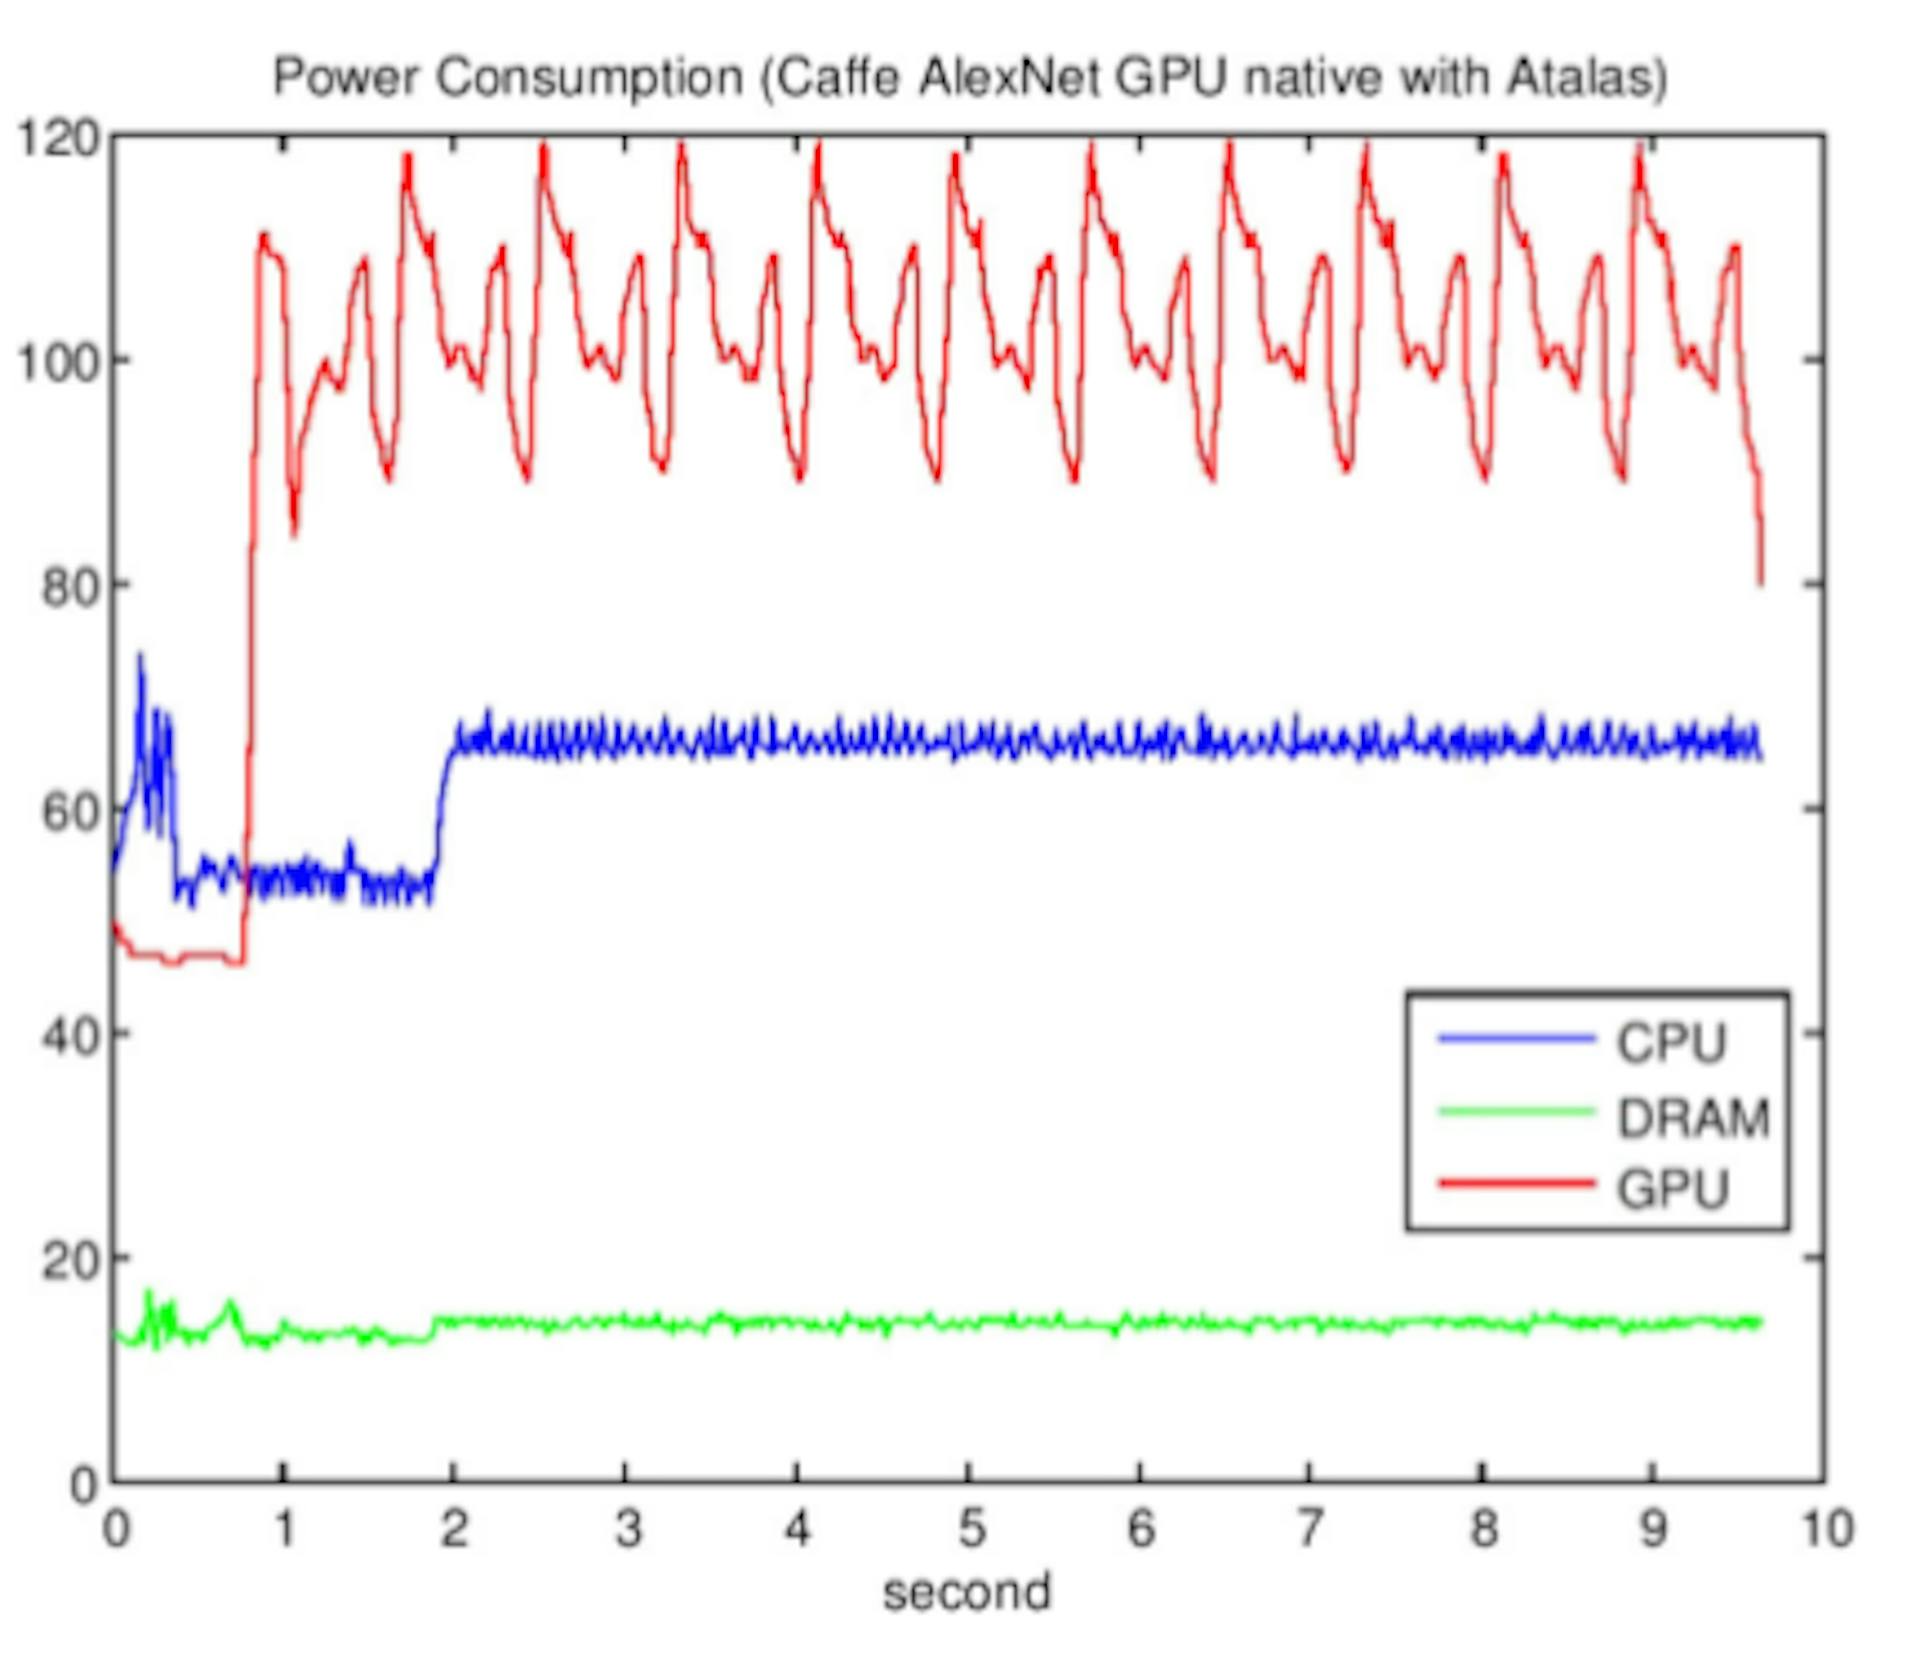 Real-time-power-consumption-data-when-training-the-AlexNet-with-Caffe-on-a-Marcher-server